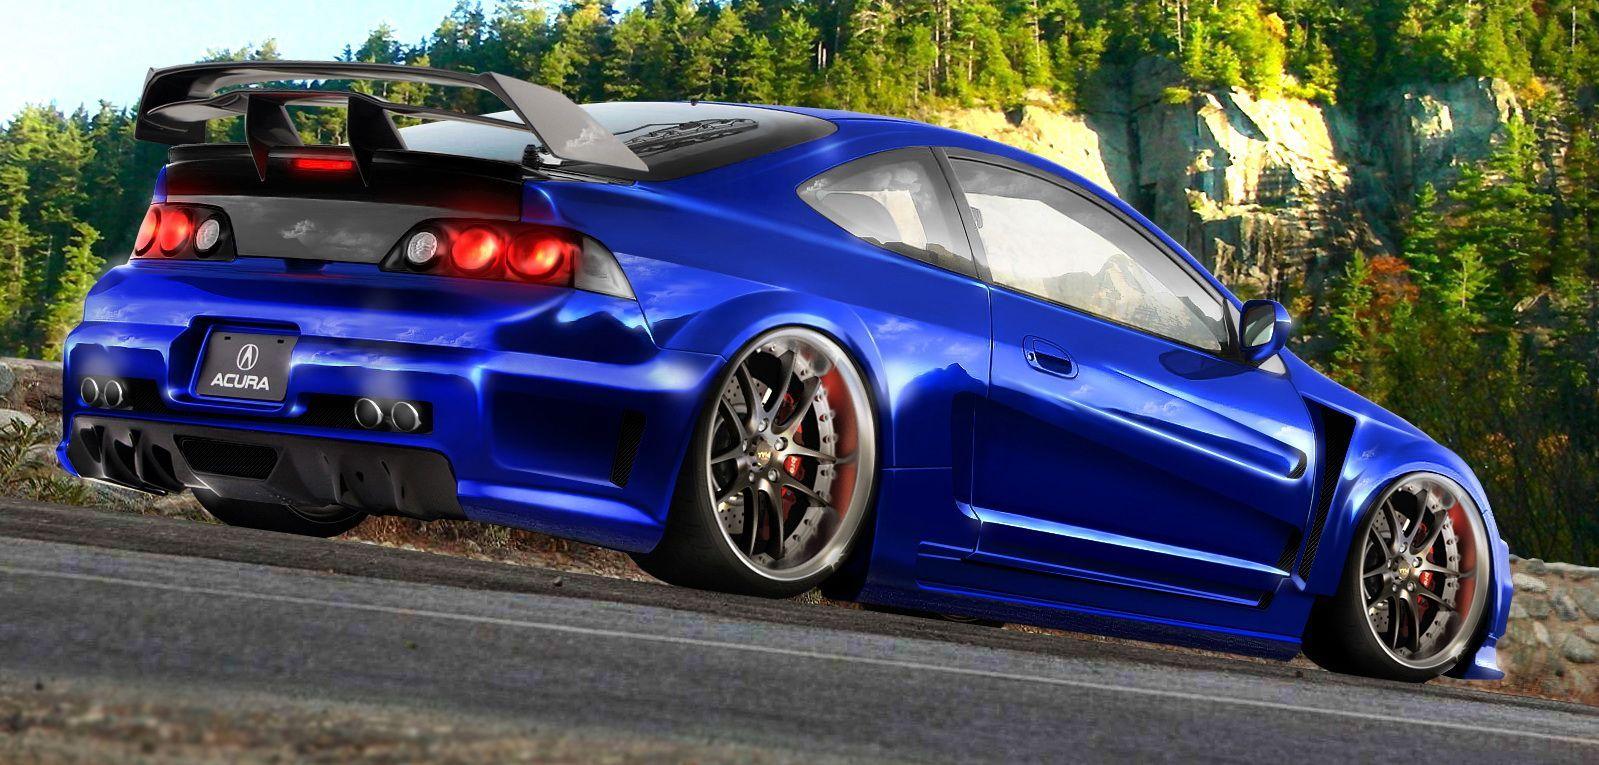 Download Acura Rsx HD Background Wallpaper 29 HD Wallpaper Full